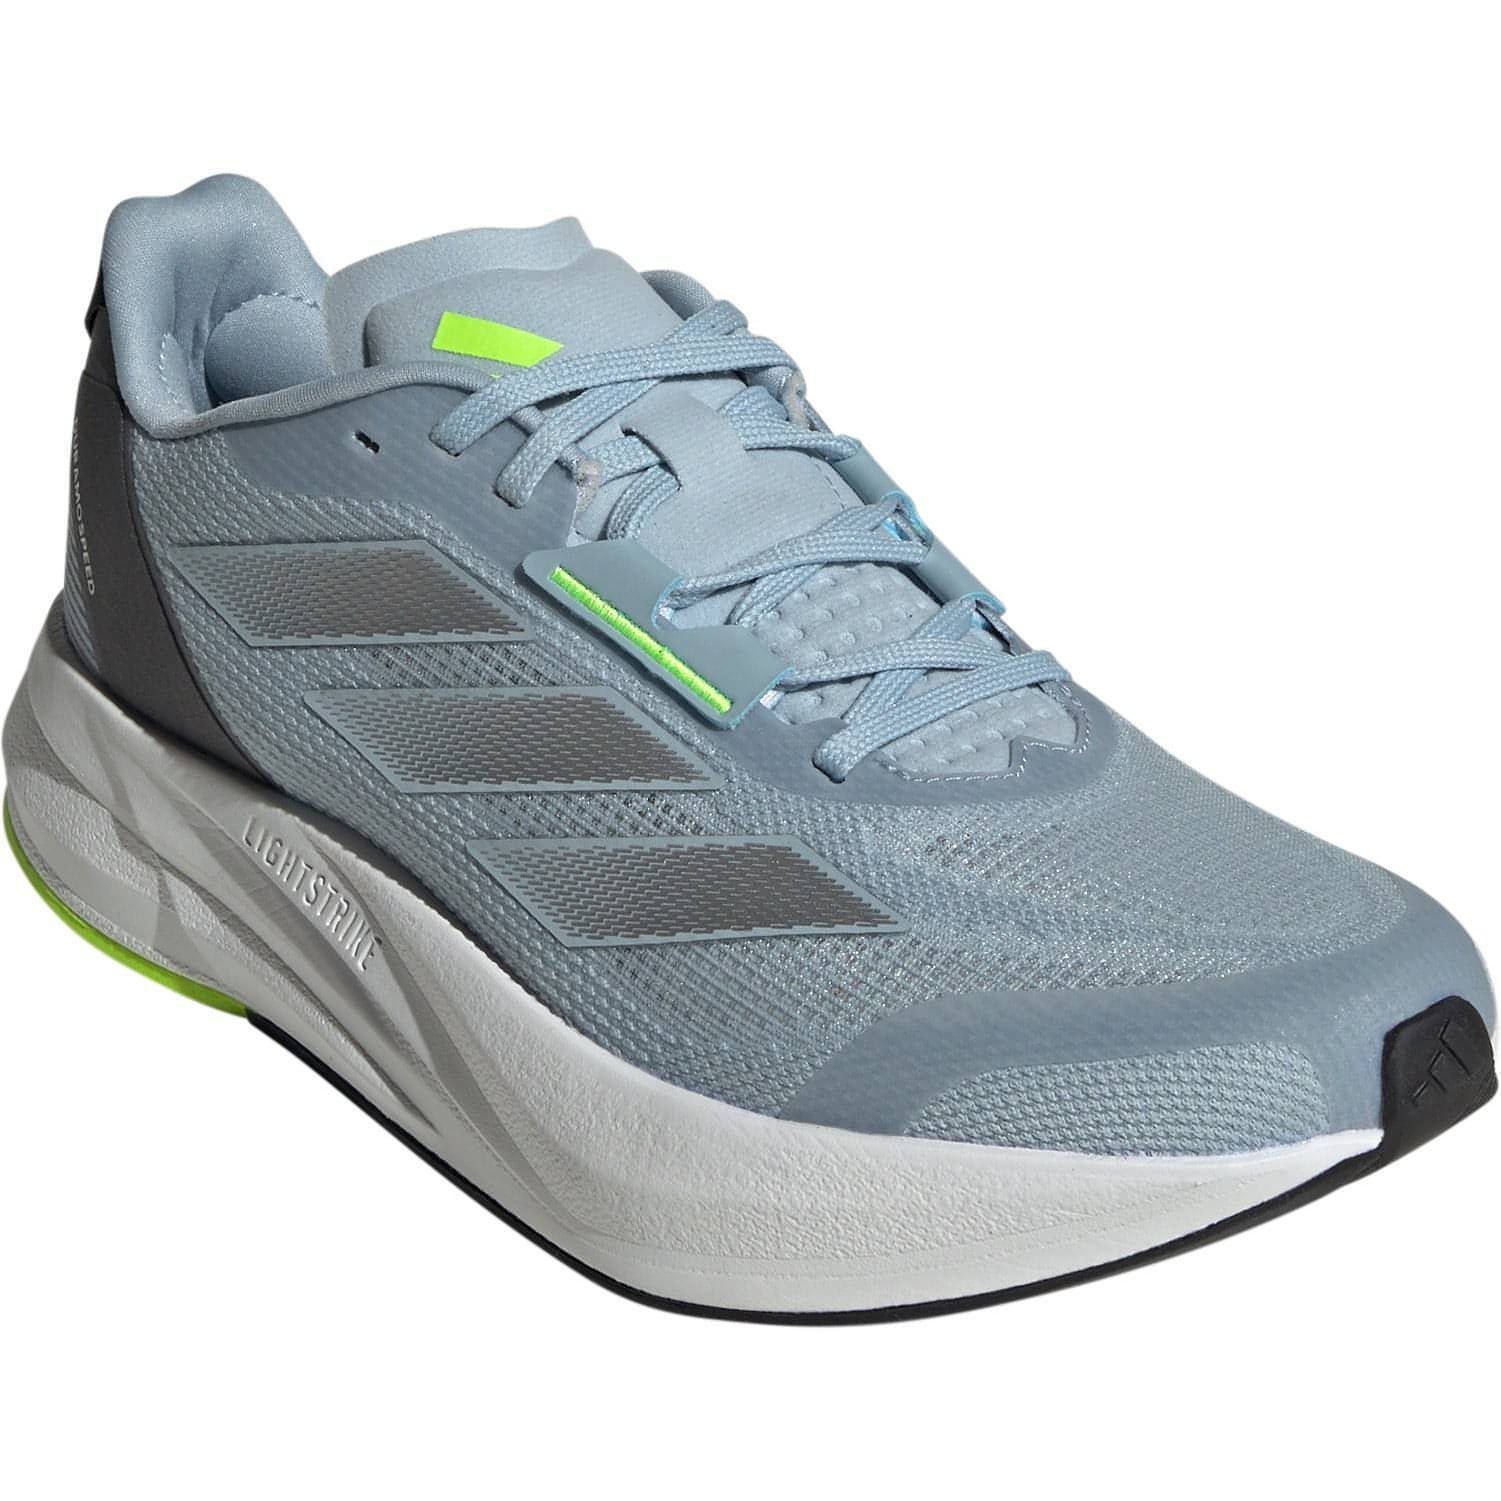 Adidas Duramo Speed Shoes Ie9686 Front - Front View